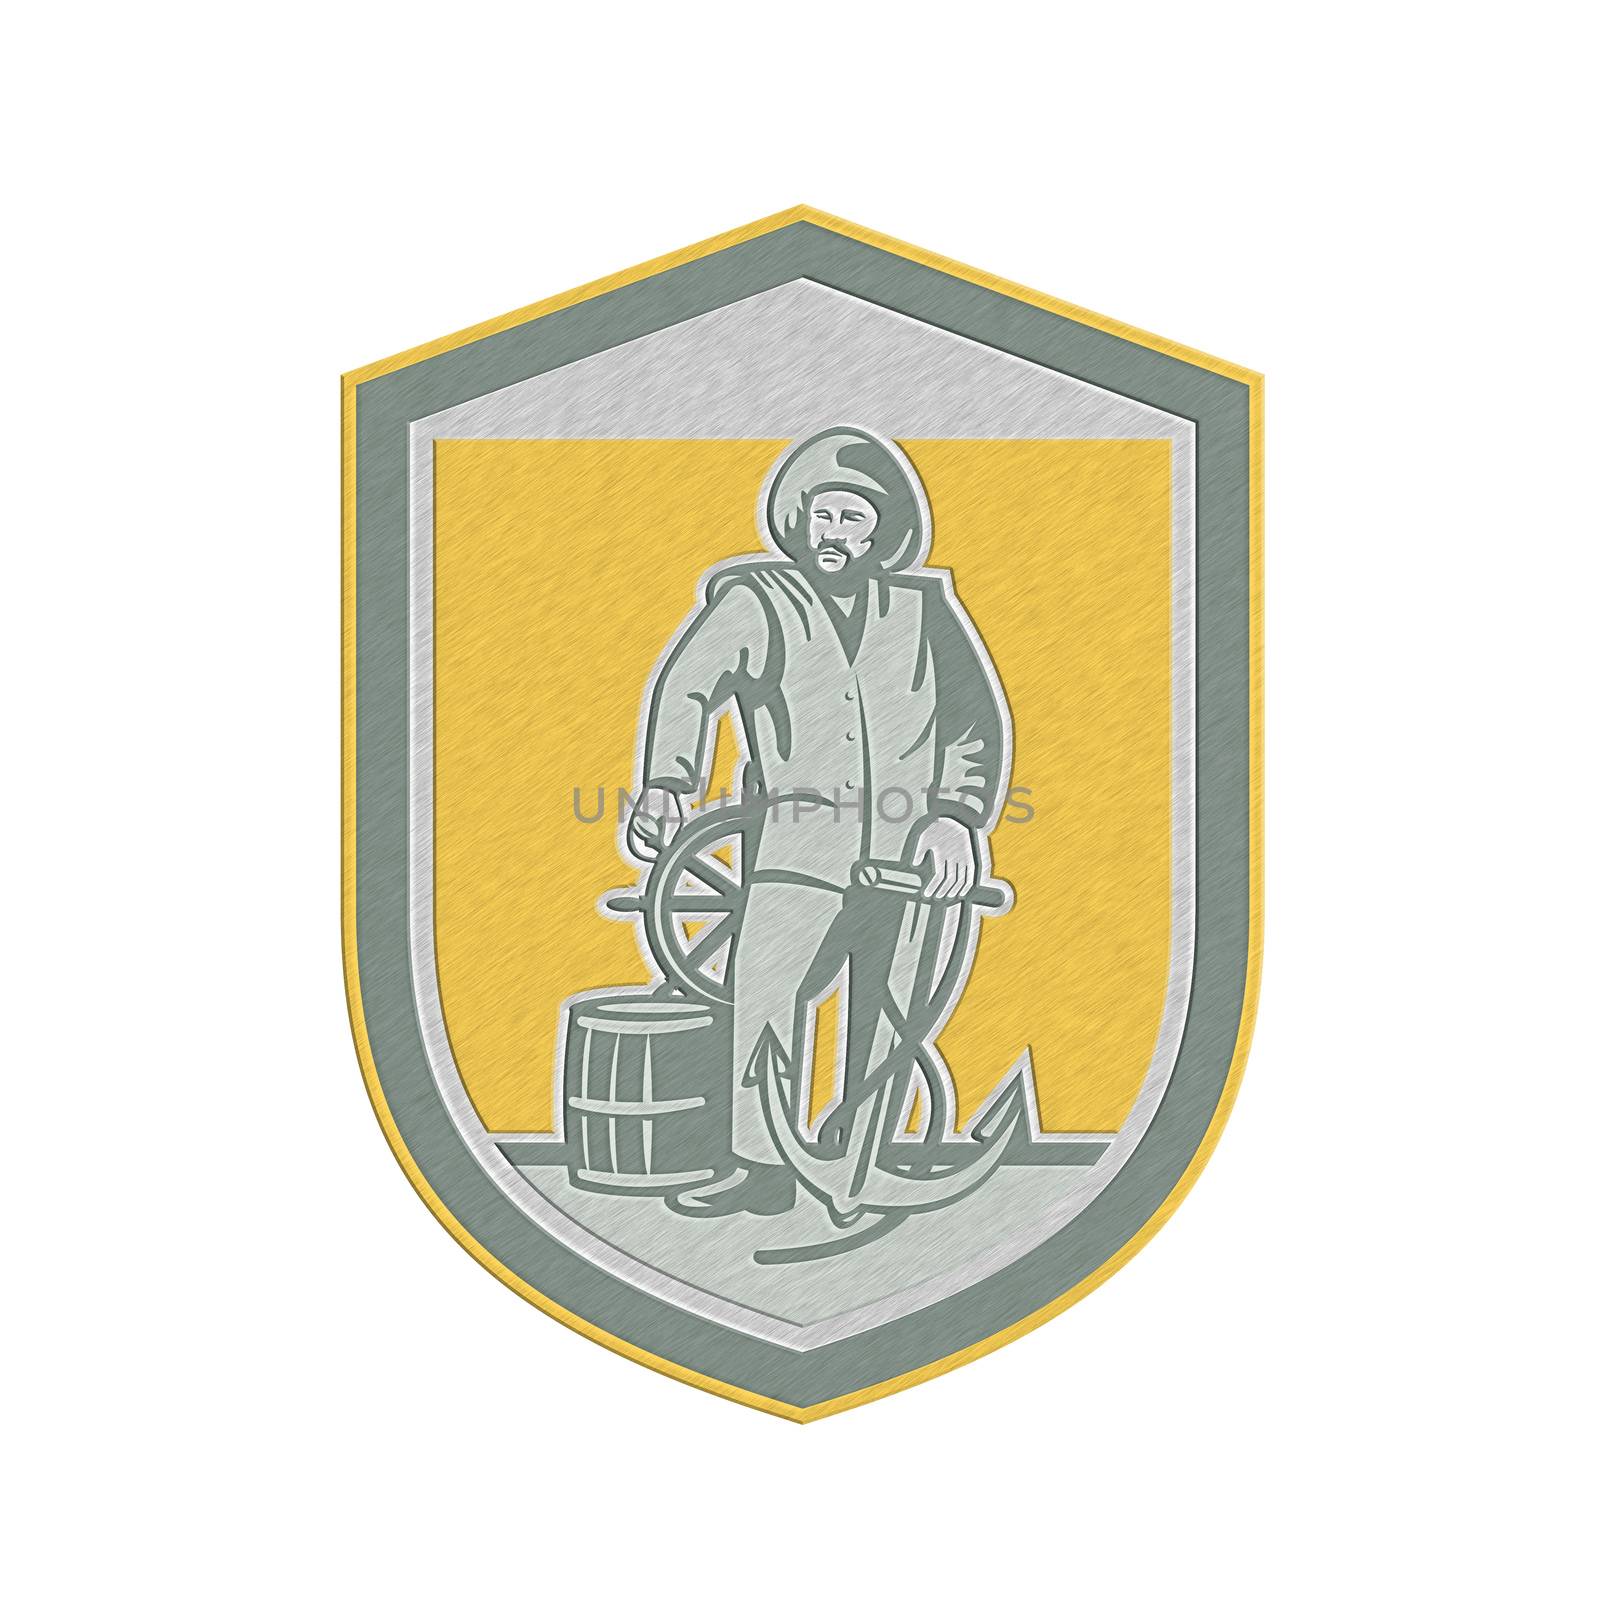 Metallic styled illustration of a fisherman sea captain holding anchor at the helm with steering wheel and drum set inside shield crest done in retro style.